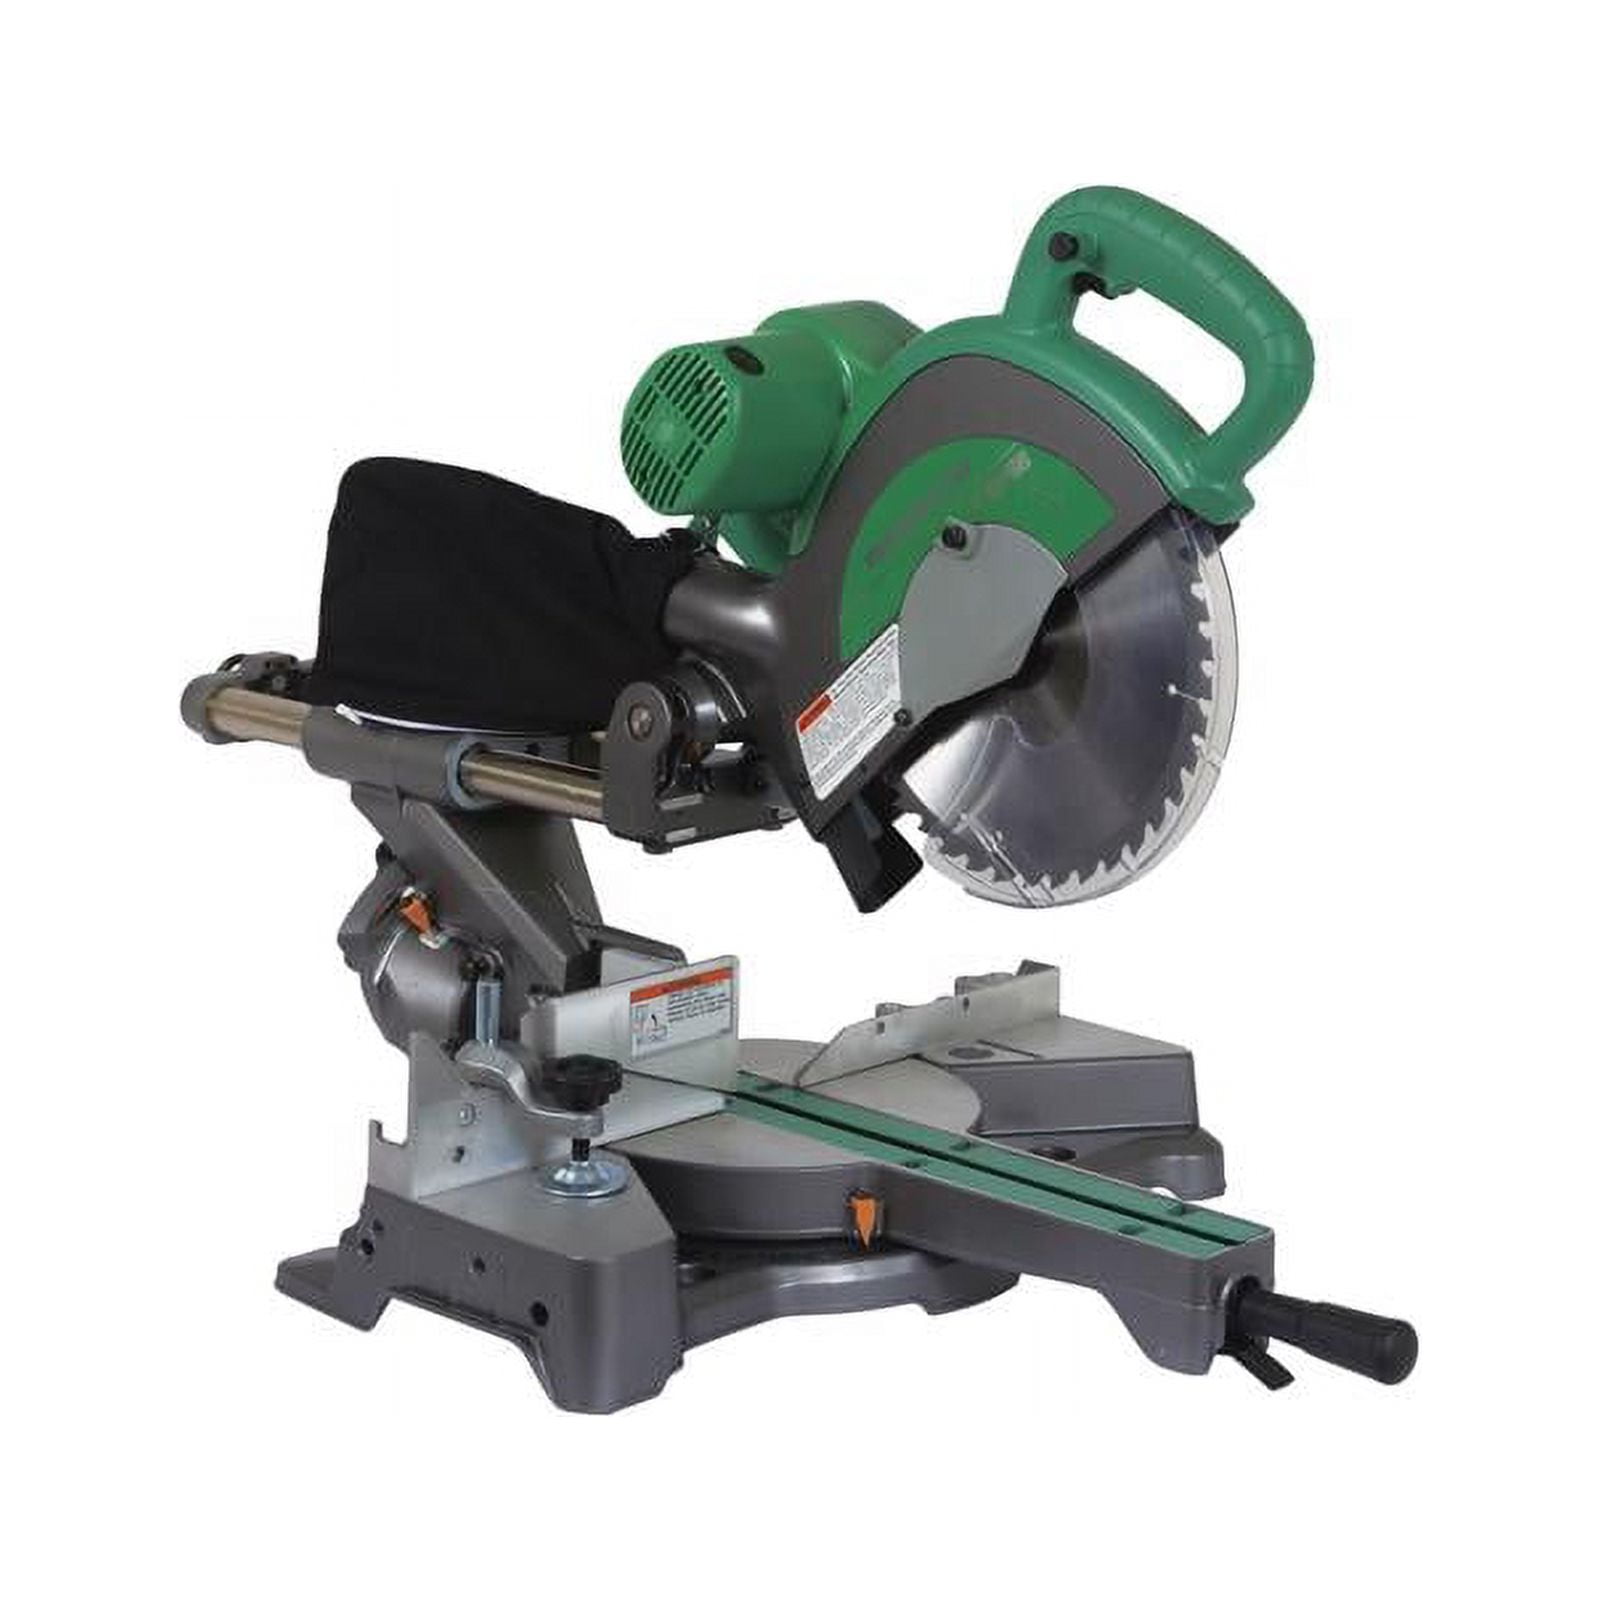 2686186 10 In. Corded 12 Amp Compound Miter Saw - 120v & 3800 Rpm